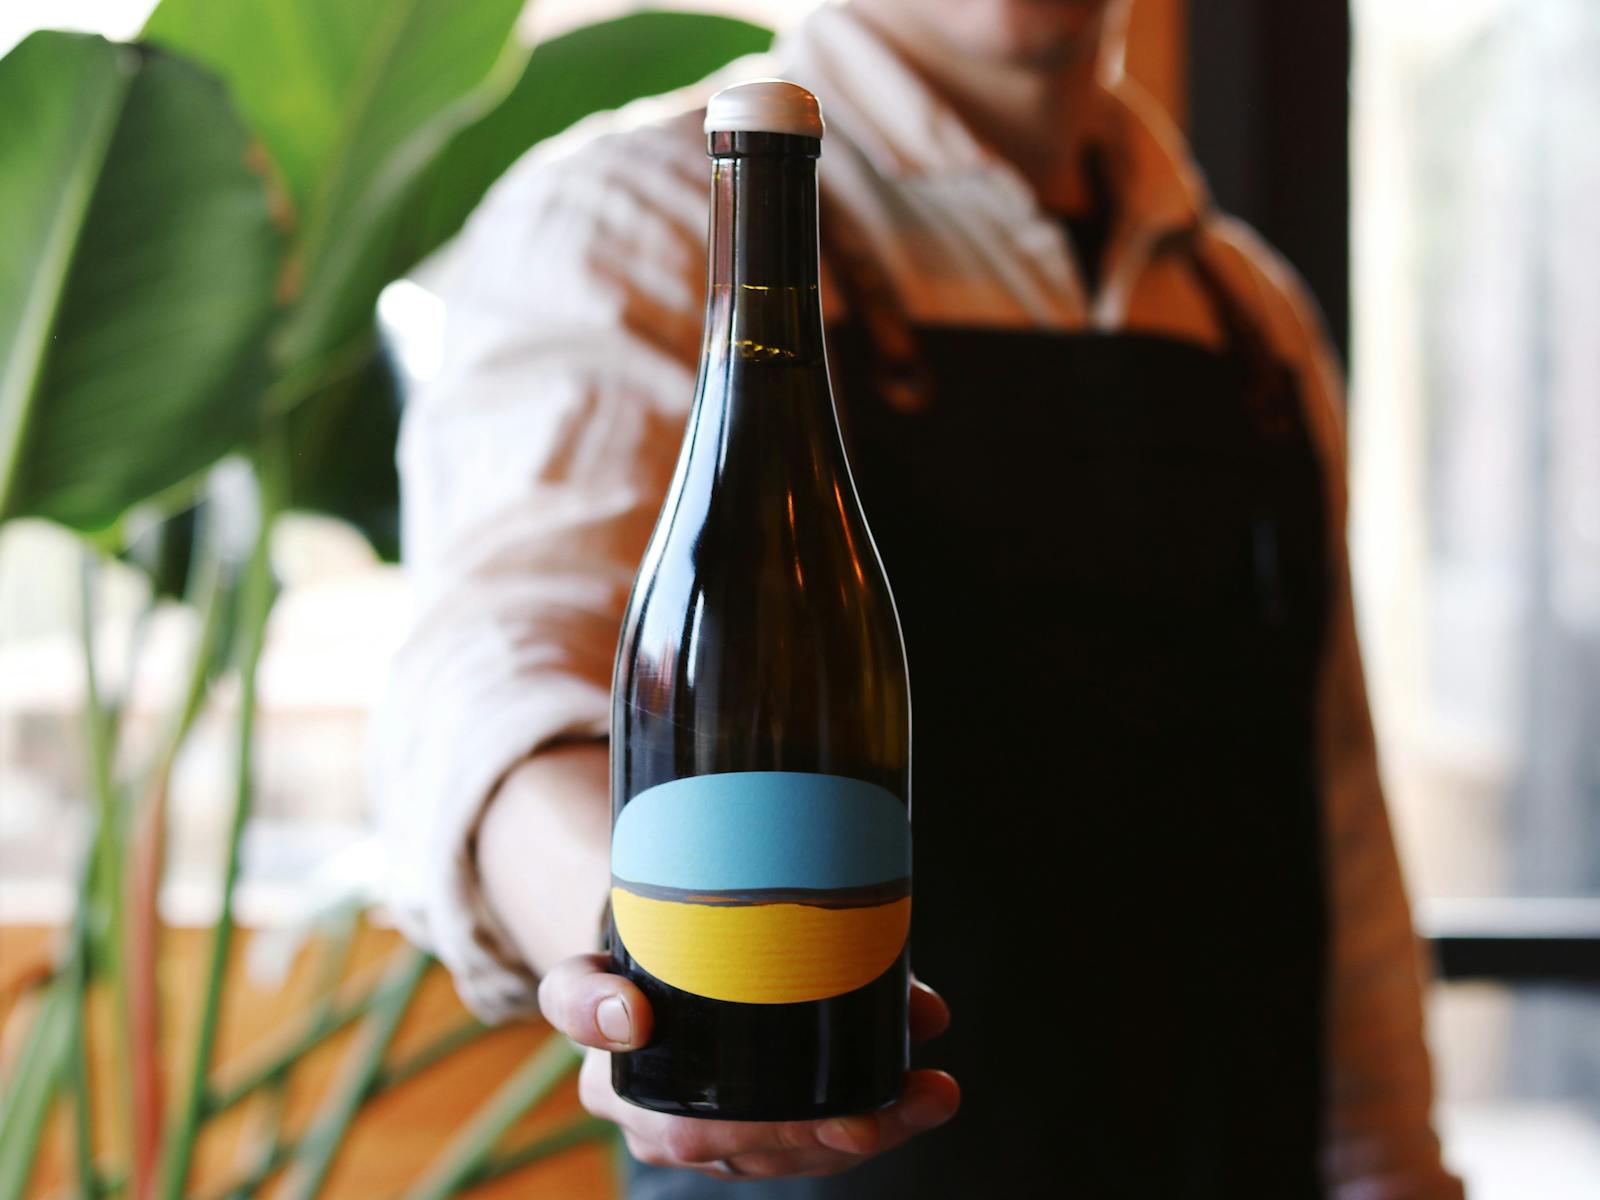 Close-up photo of a wine bottle with a blue and yellow label held by waitstaff (face not visible)